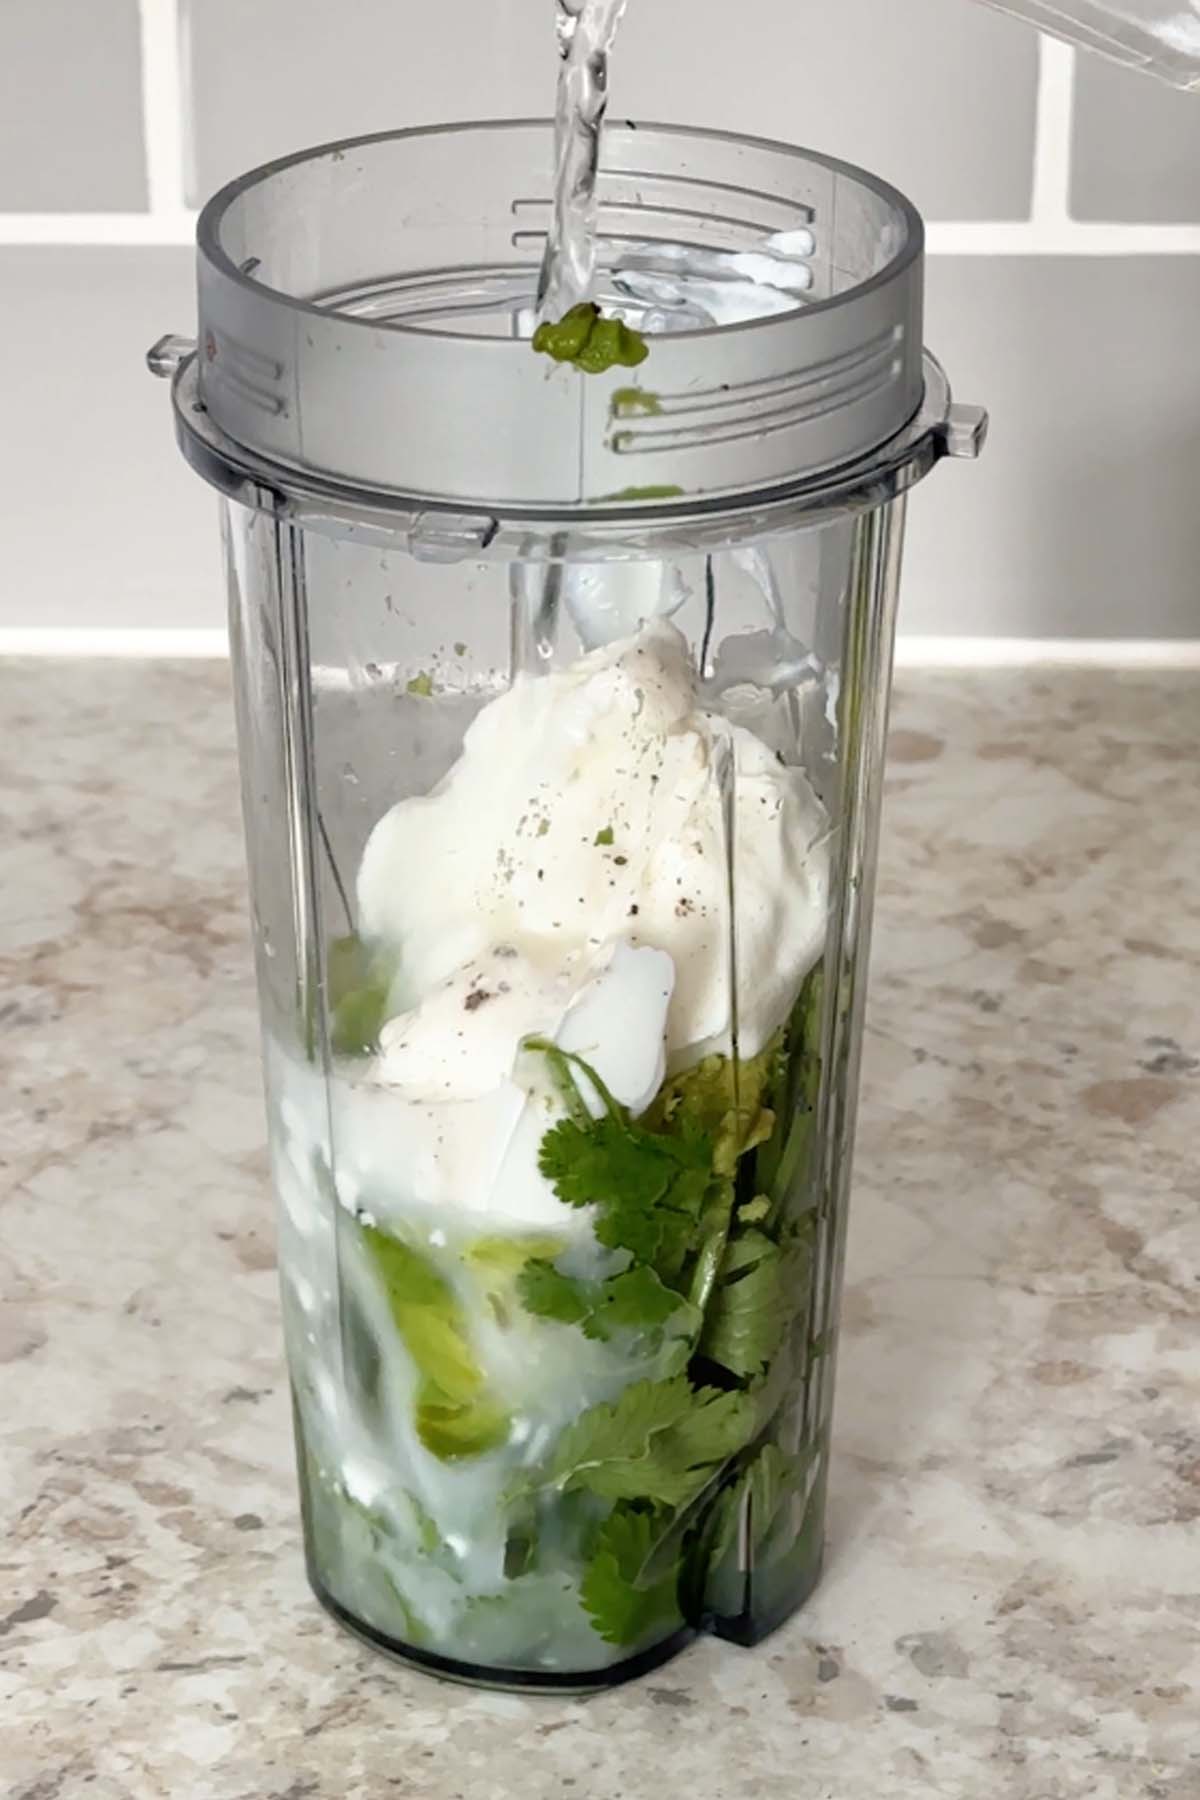 Cilantro, yogurt, lime juice, and avocado in a blender cup.